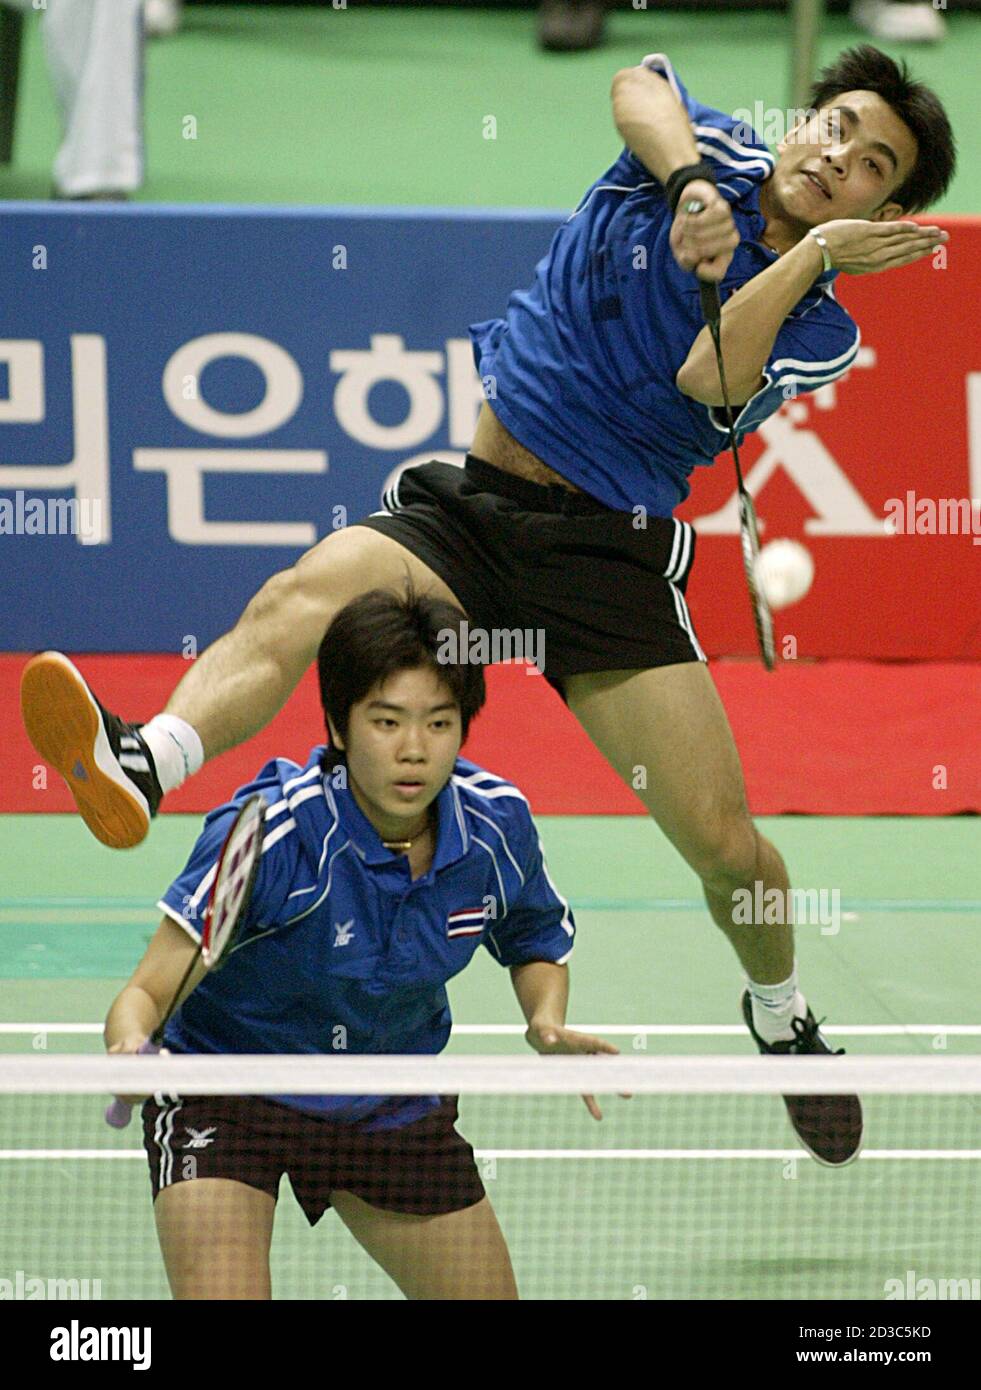 Thailand's Khunakorn Sudhisodhi jumps to smash as Saralee Thoungthongkam  waits against South Korea's Kim Dong Moon and Ra Kyung Min during the mixed  doubles badminton final at the 14th Asian Games in